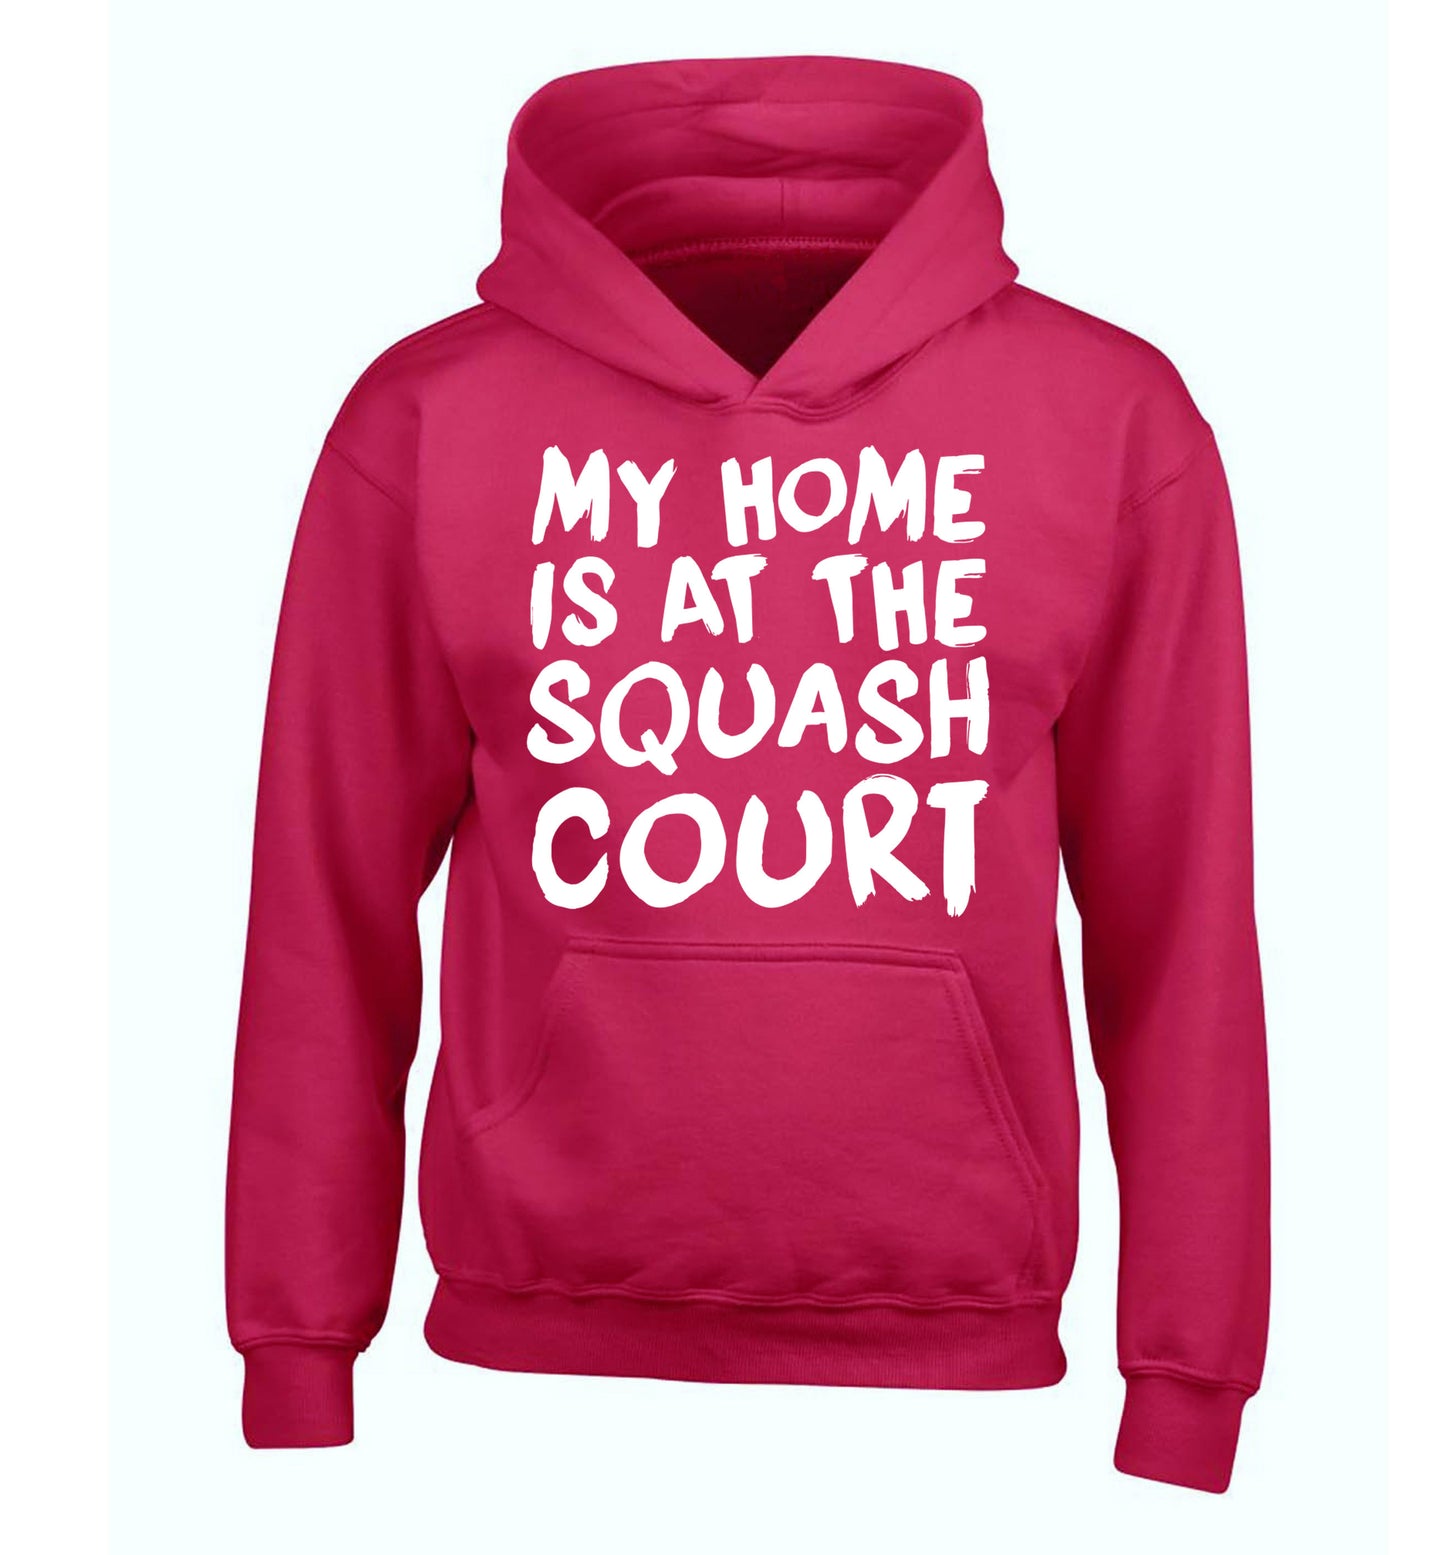 My home is at the squash court children's pink hoodie 12-14 Years